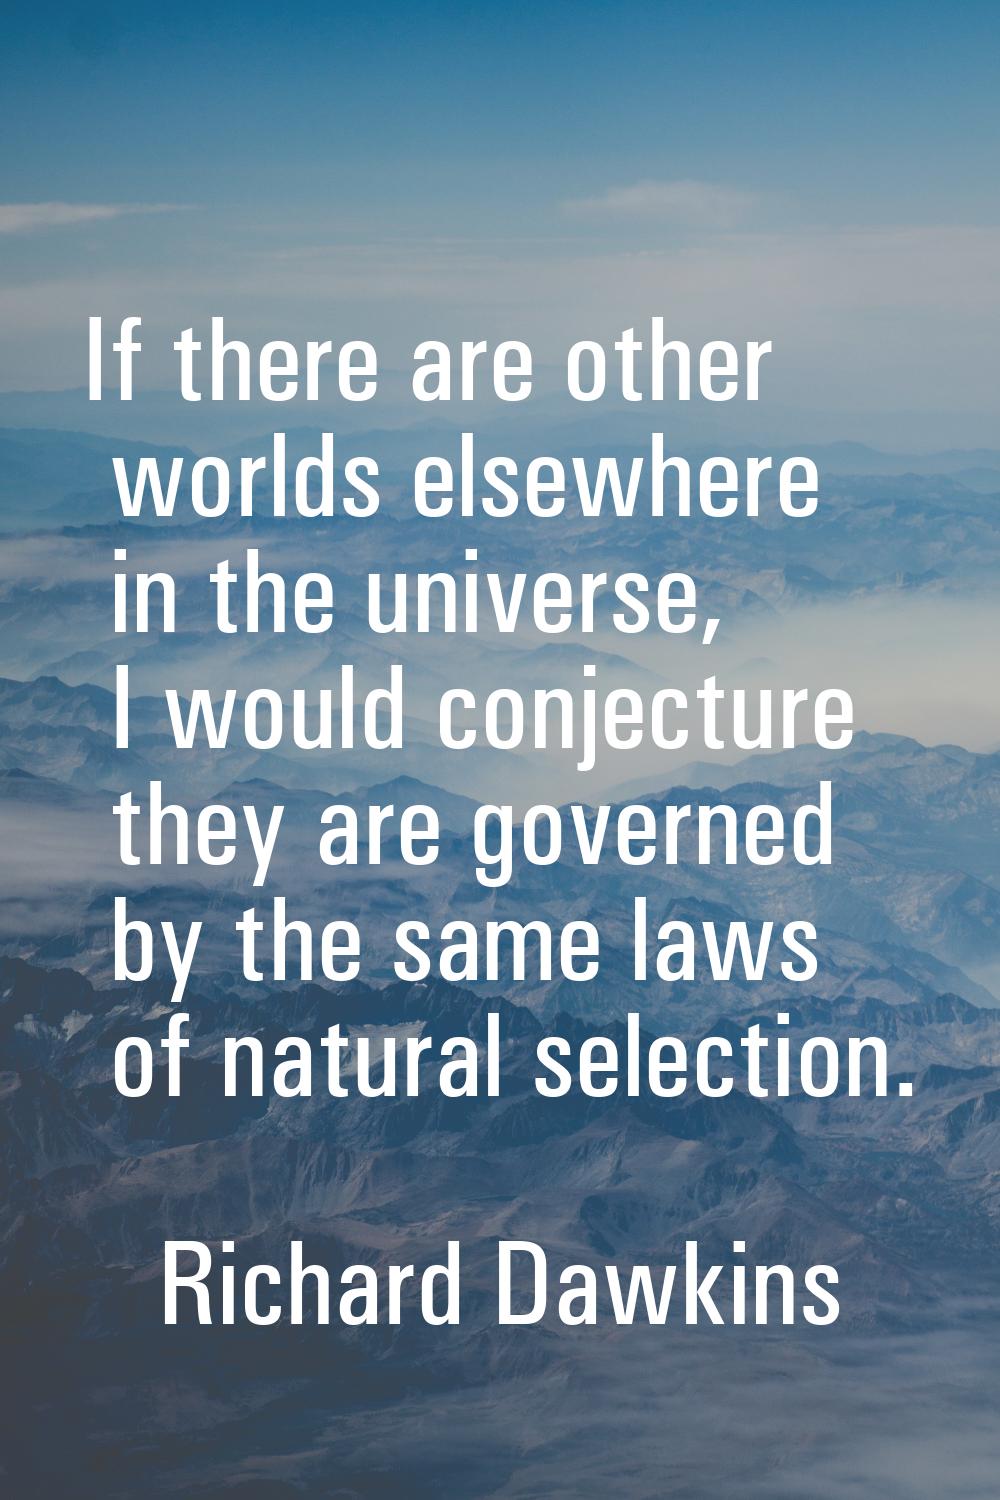 If there are other worlds elsewhere in the universe, I would conjecture they are governed by the sa